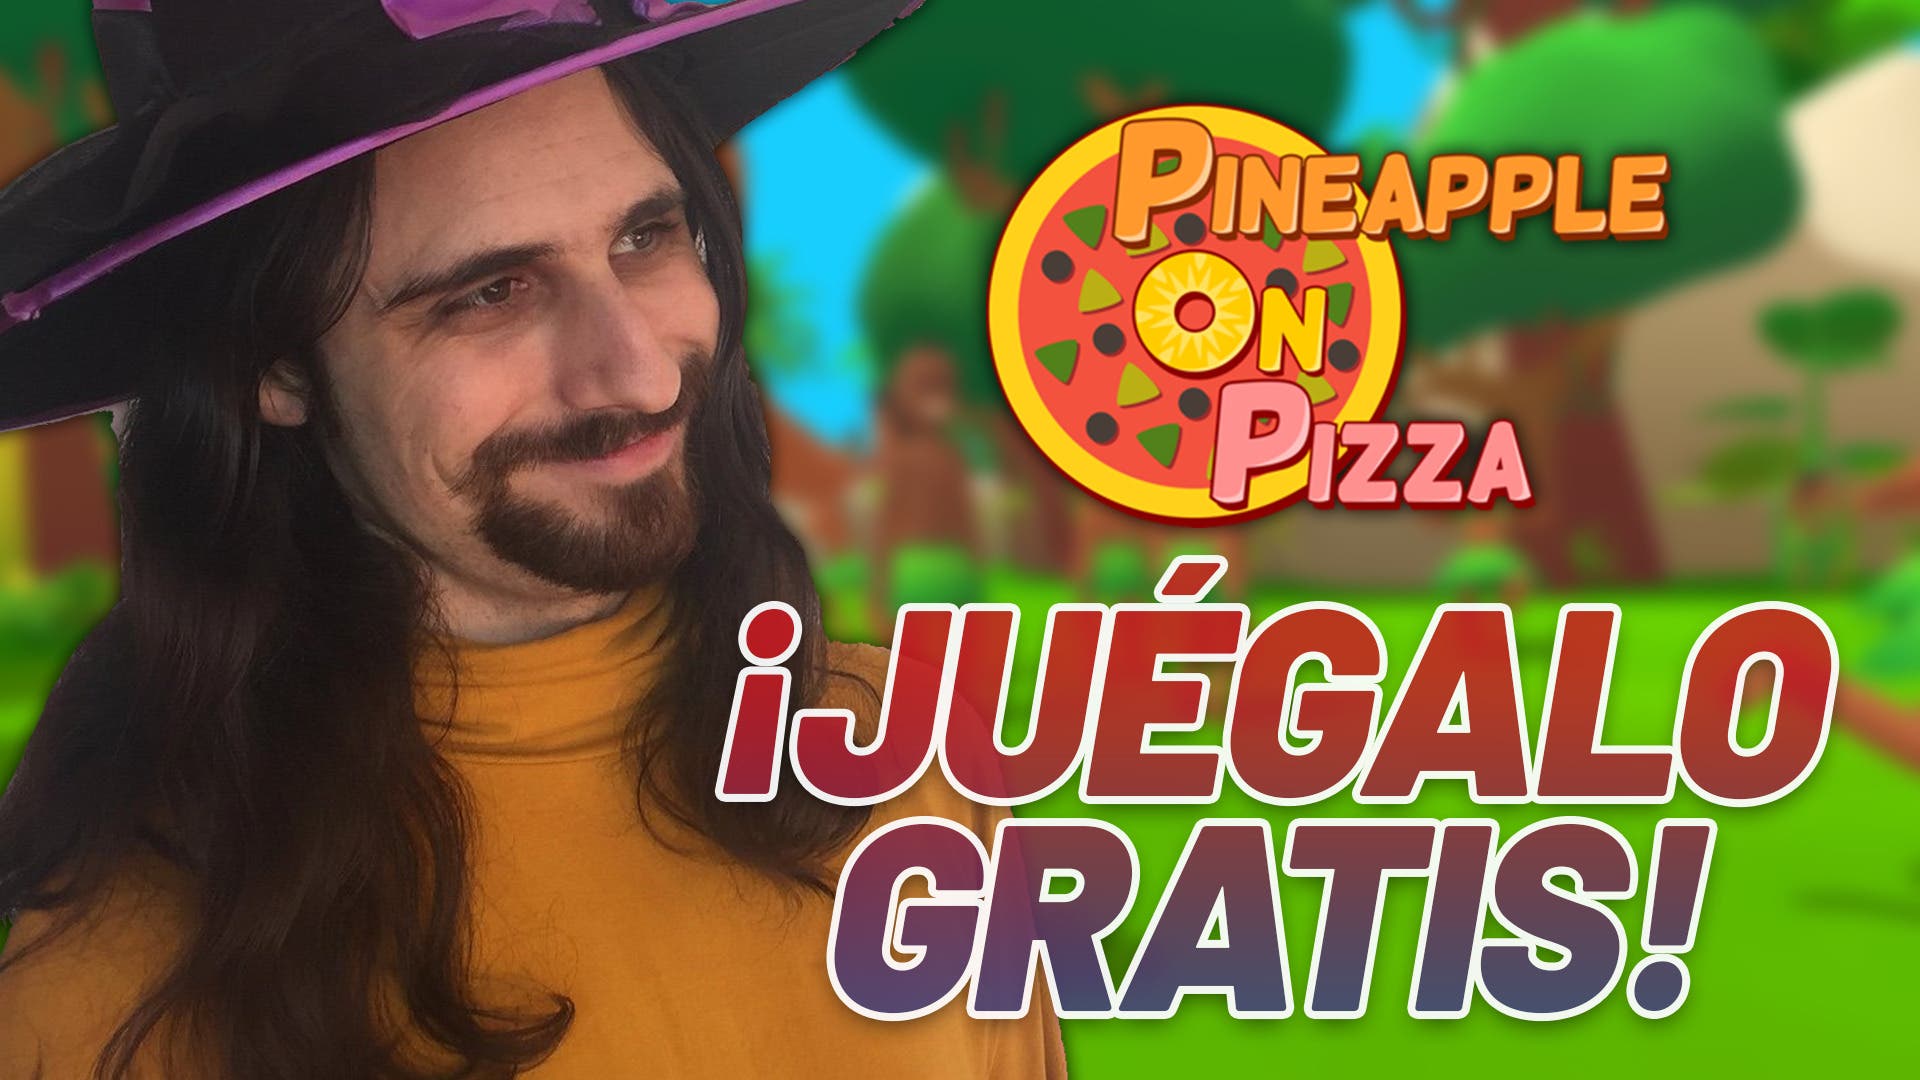 You can now play Pineapple on Pizza, Alva Majo’s crazy new game for free